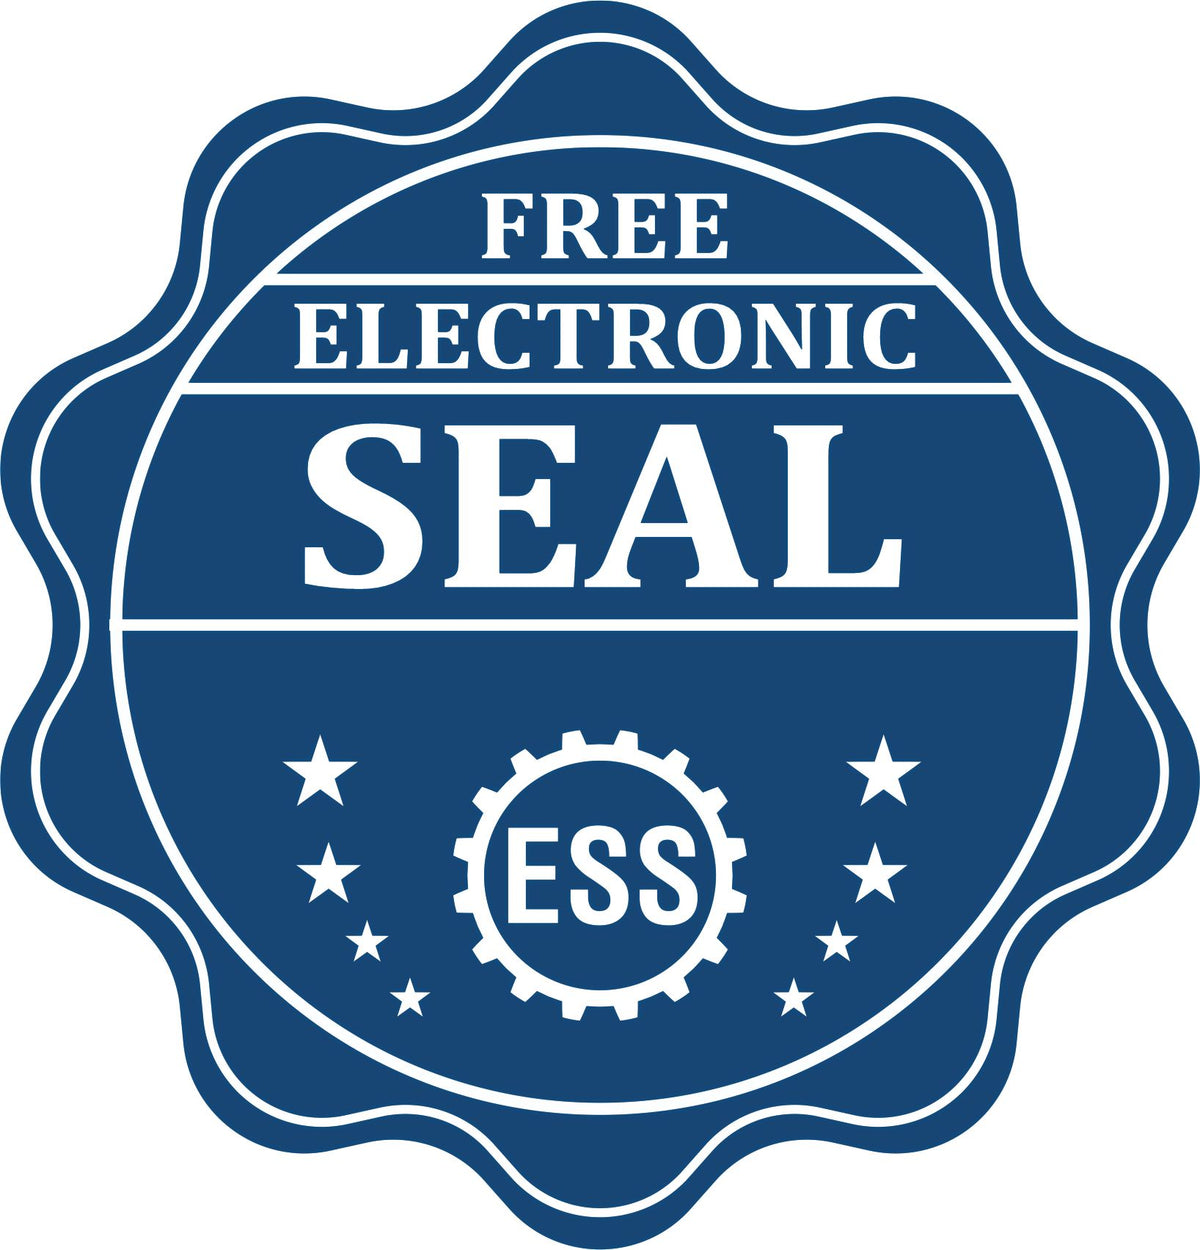 A badge showing a free electronic seal for the Premium MaxLight Pre-Inked Georgia Engineering Stamp with stars and the ESS gear on the emblem.